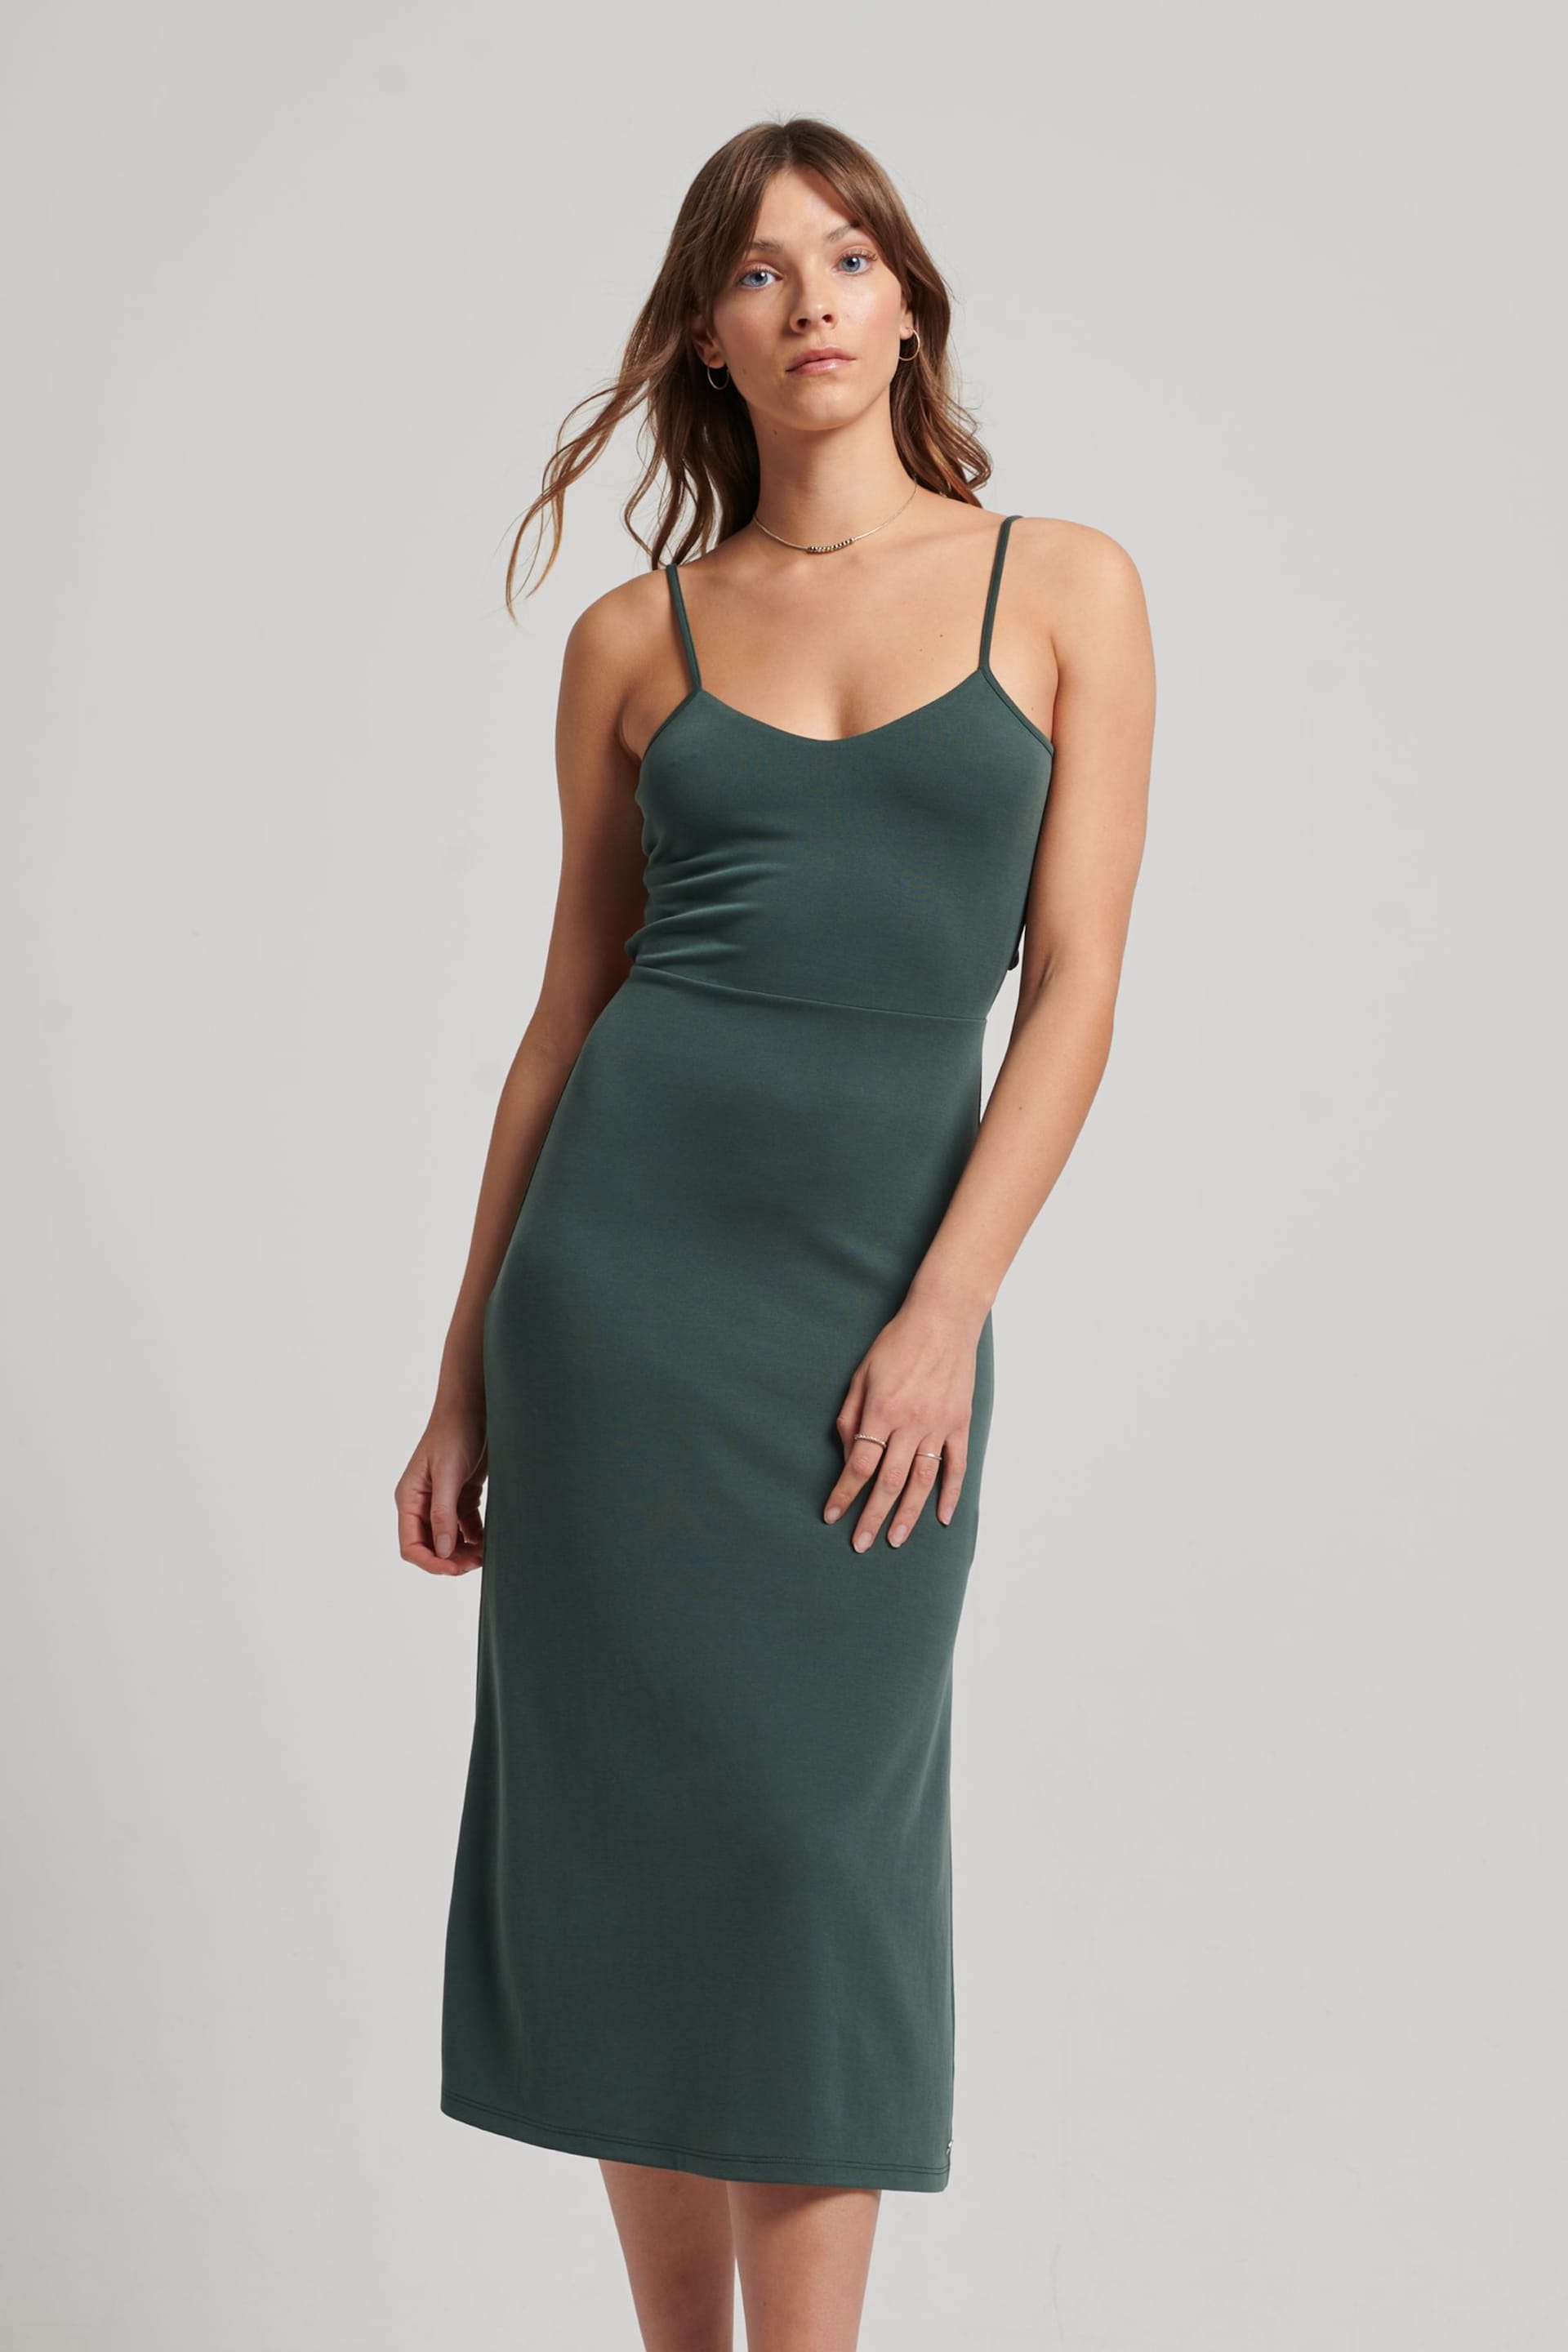 Superdry Green Jersey Open Back Dress - Image 1 of 6